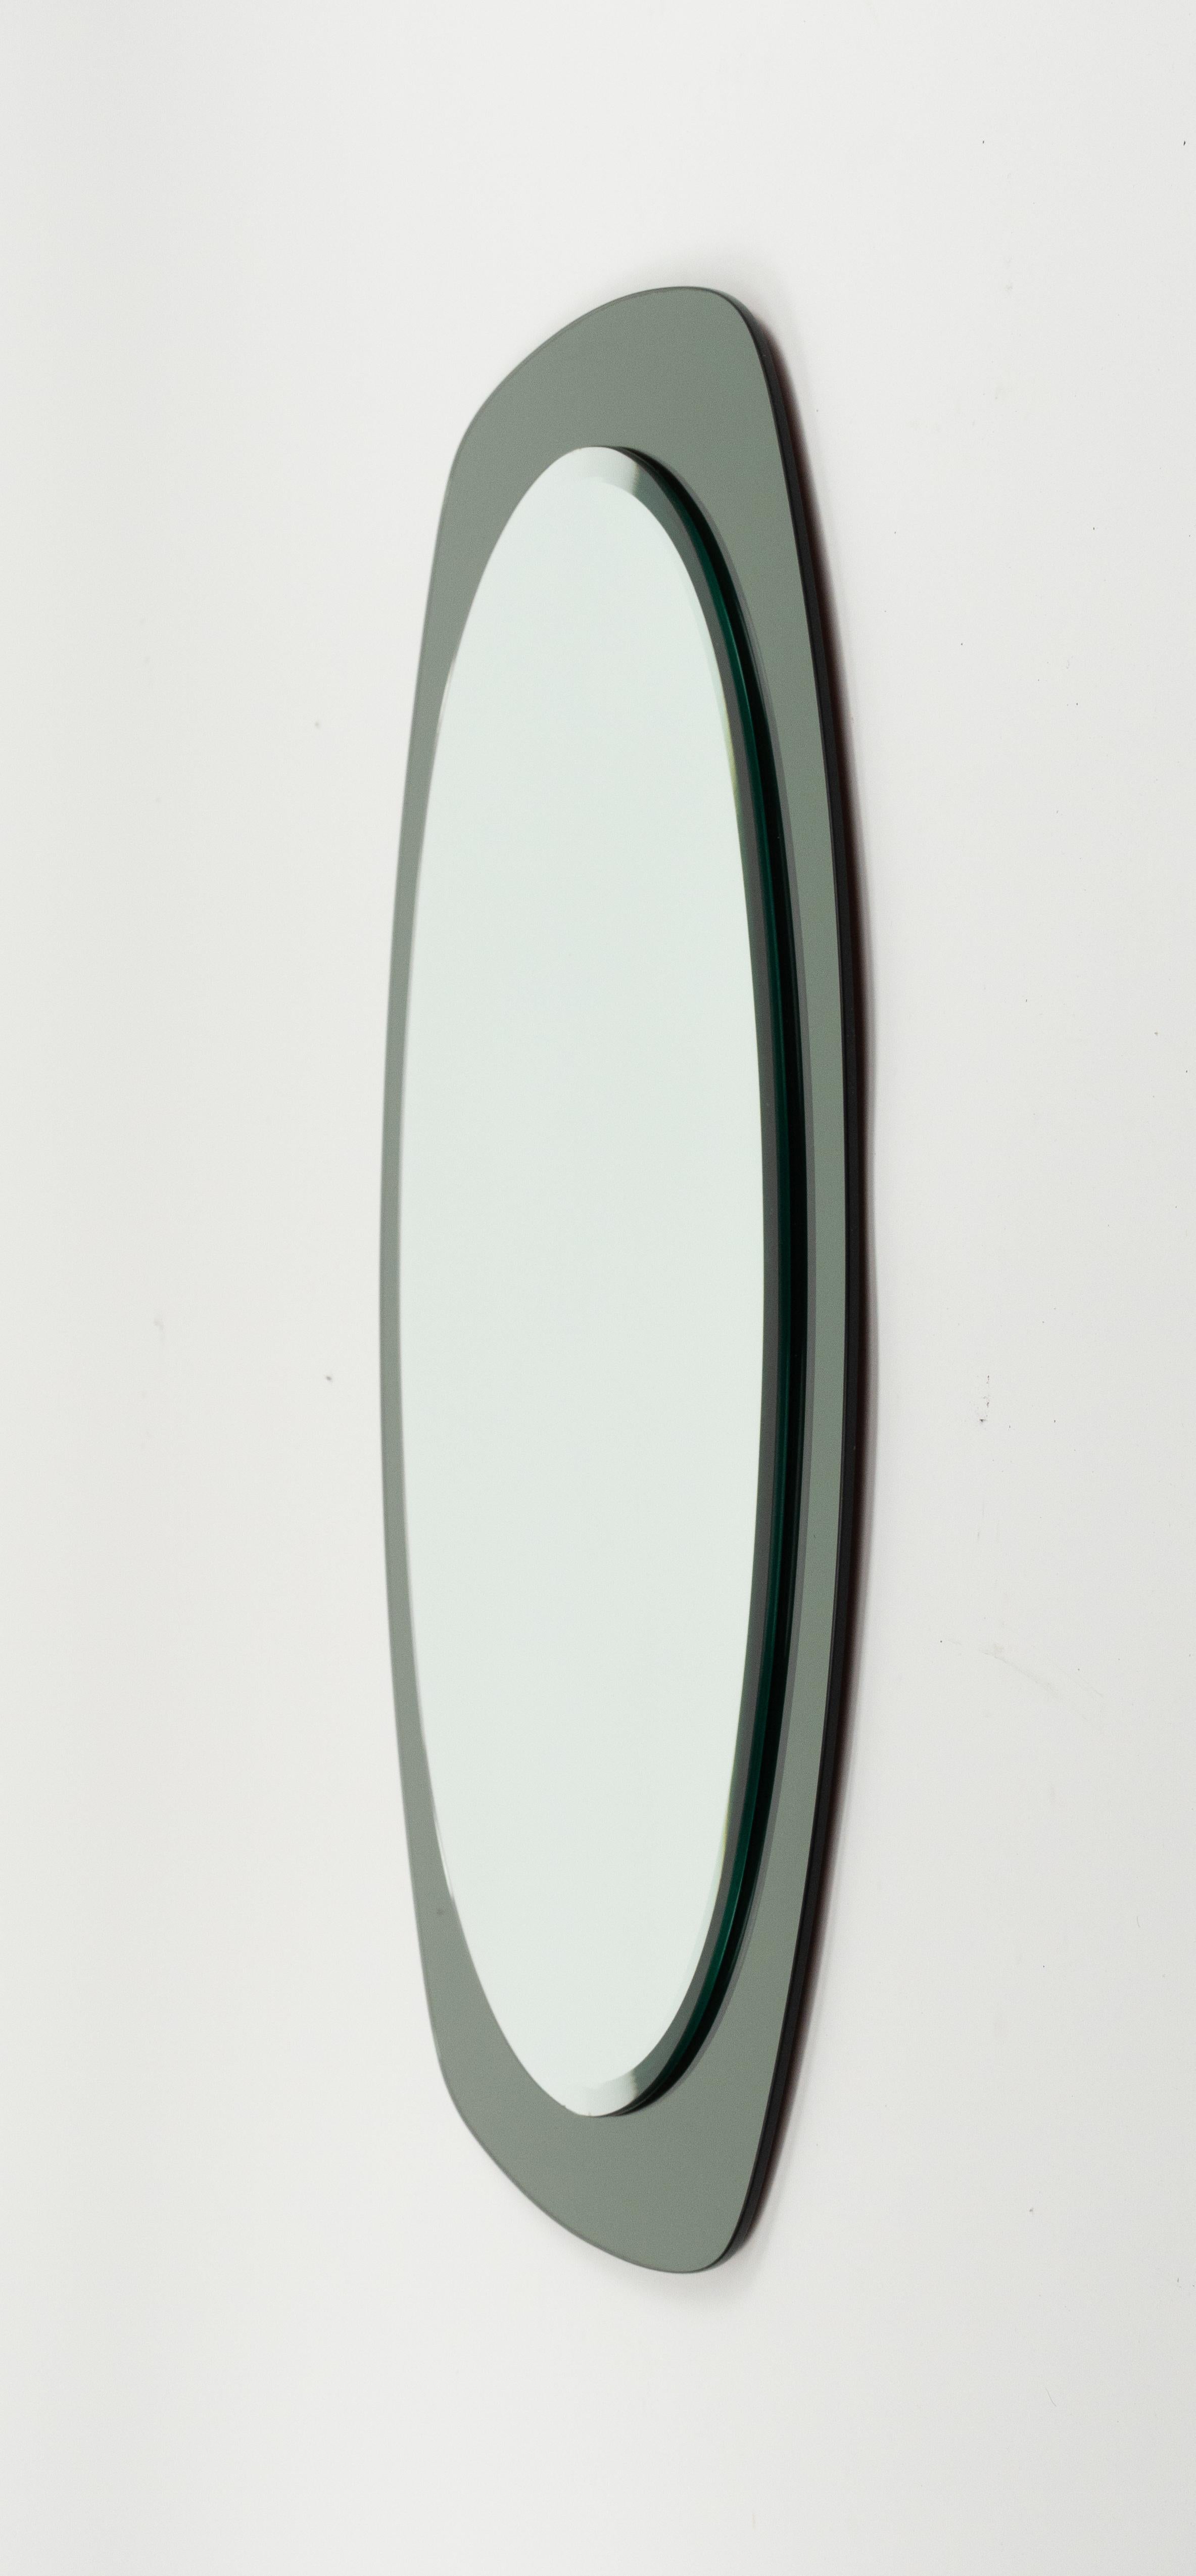 Midcentury Cristal Art Oval Wall Mirror with Green Frame, Italy 1960s For Sale 5